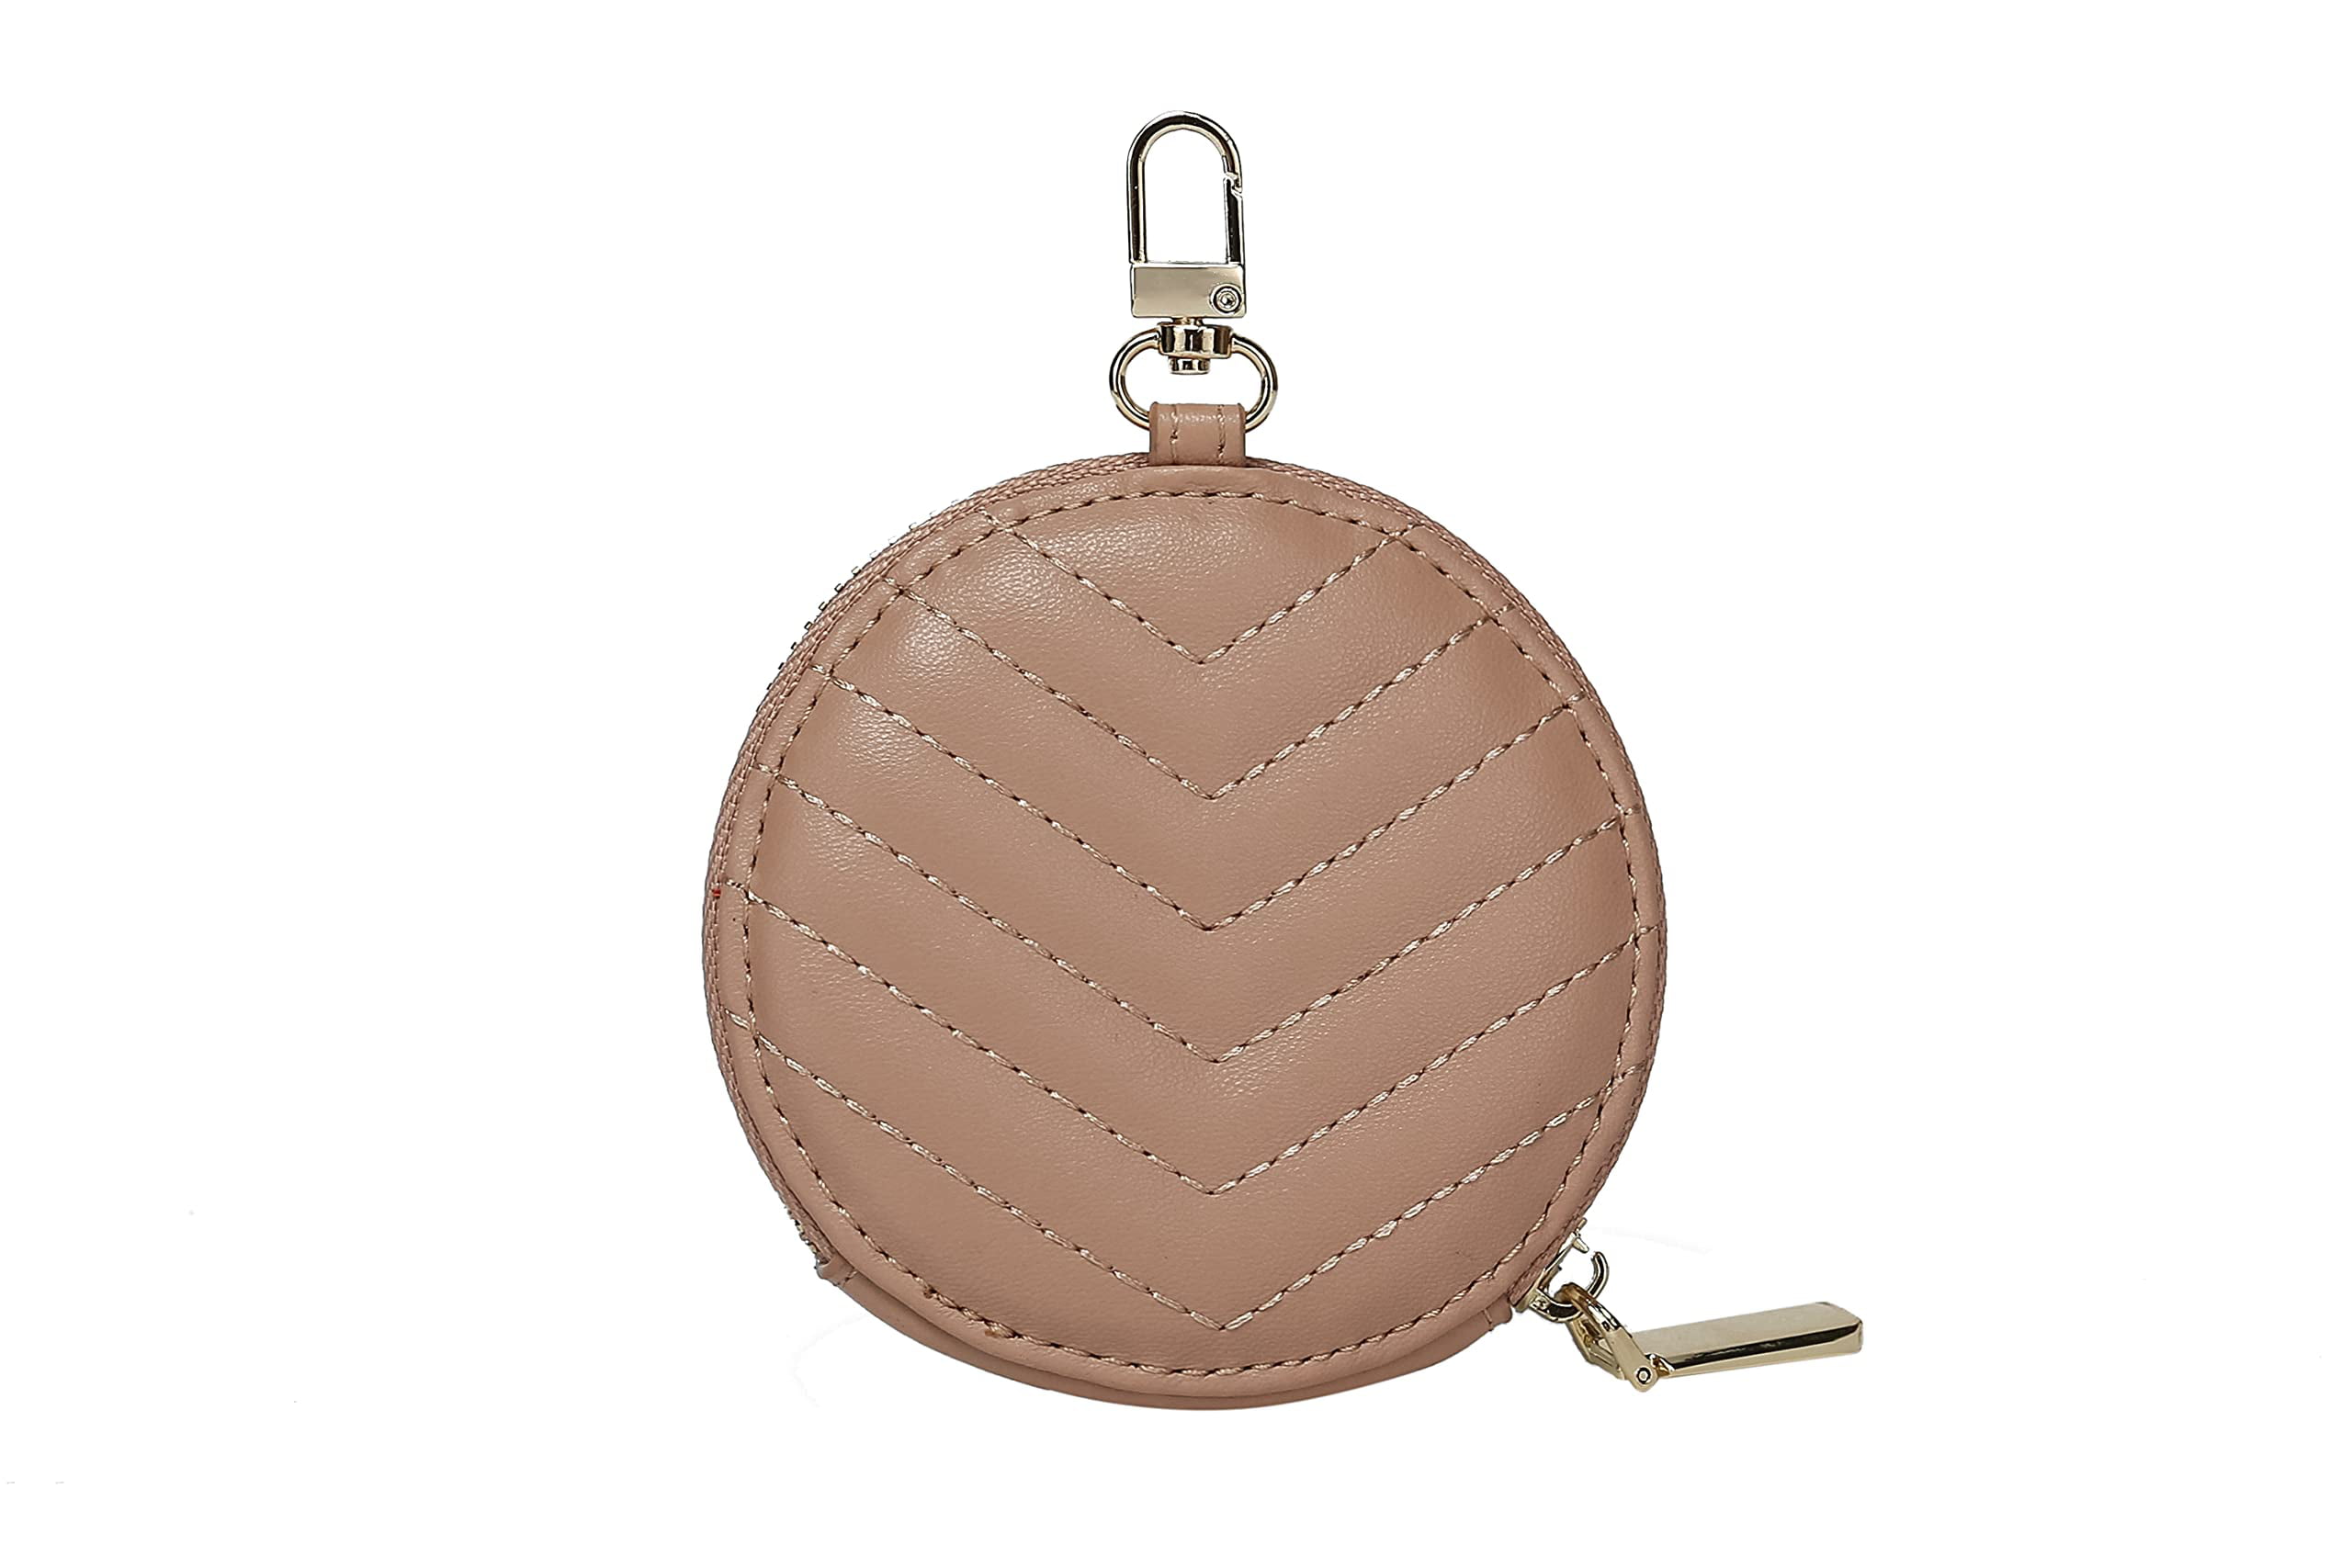 Daisy Rose Round Coin Purse Pouch Change Wallet Holder for Women with Clasp - PU Vegan Leather - Beige, Adult Unisex, Size: One Size